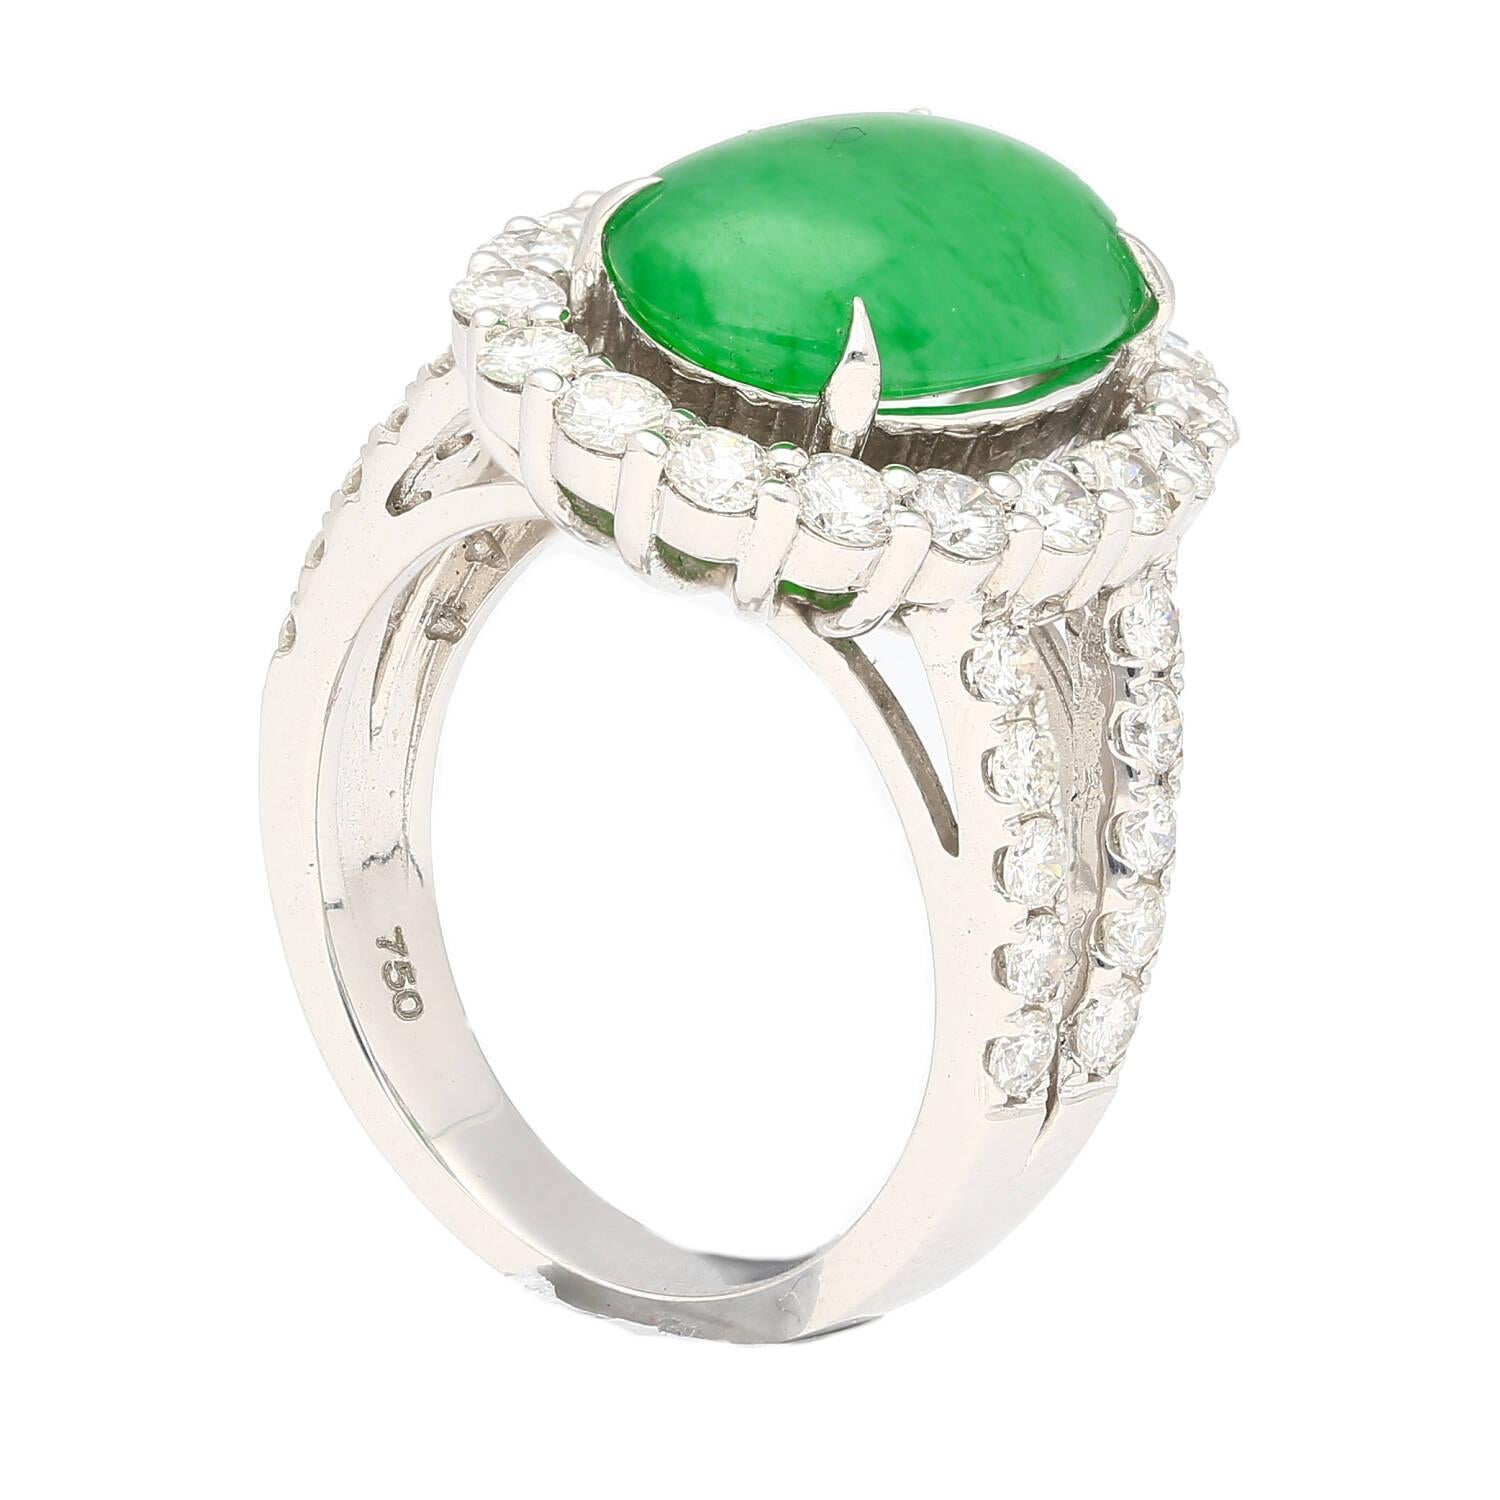 HK Lab Certified 5.329 Carat Jade and Diamond Halo Ring in 18K White Gold For Sale 1